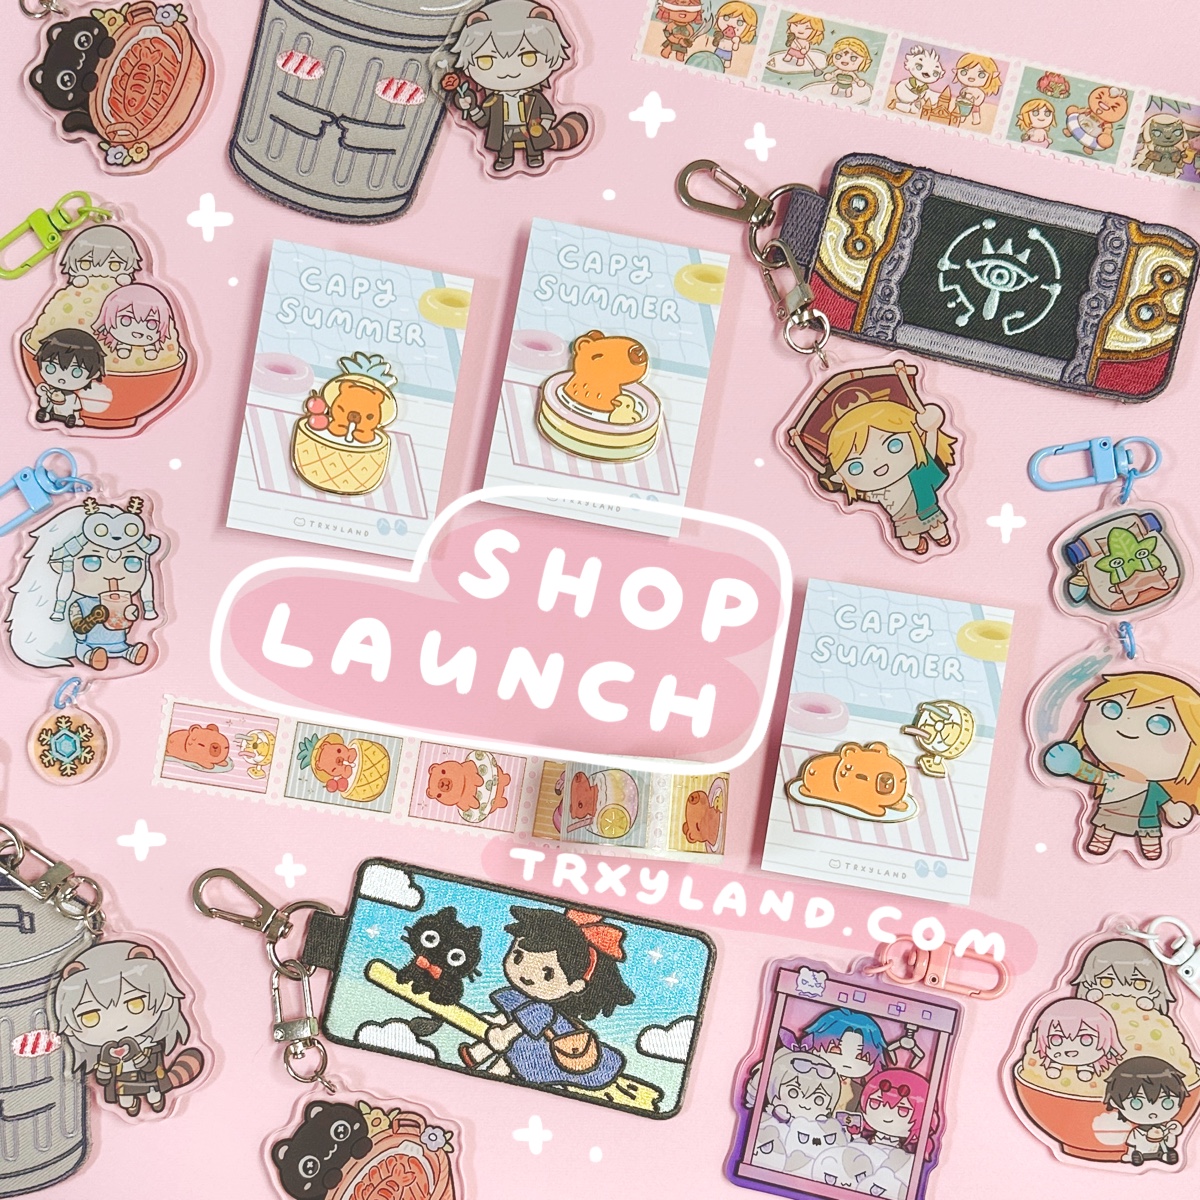 New stuff in the sh0p! Capy friends, Kiki keyring & more 🍹✨ 